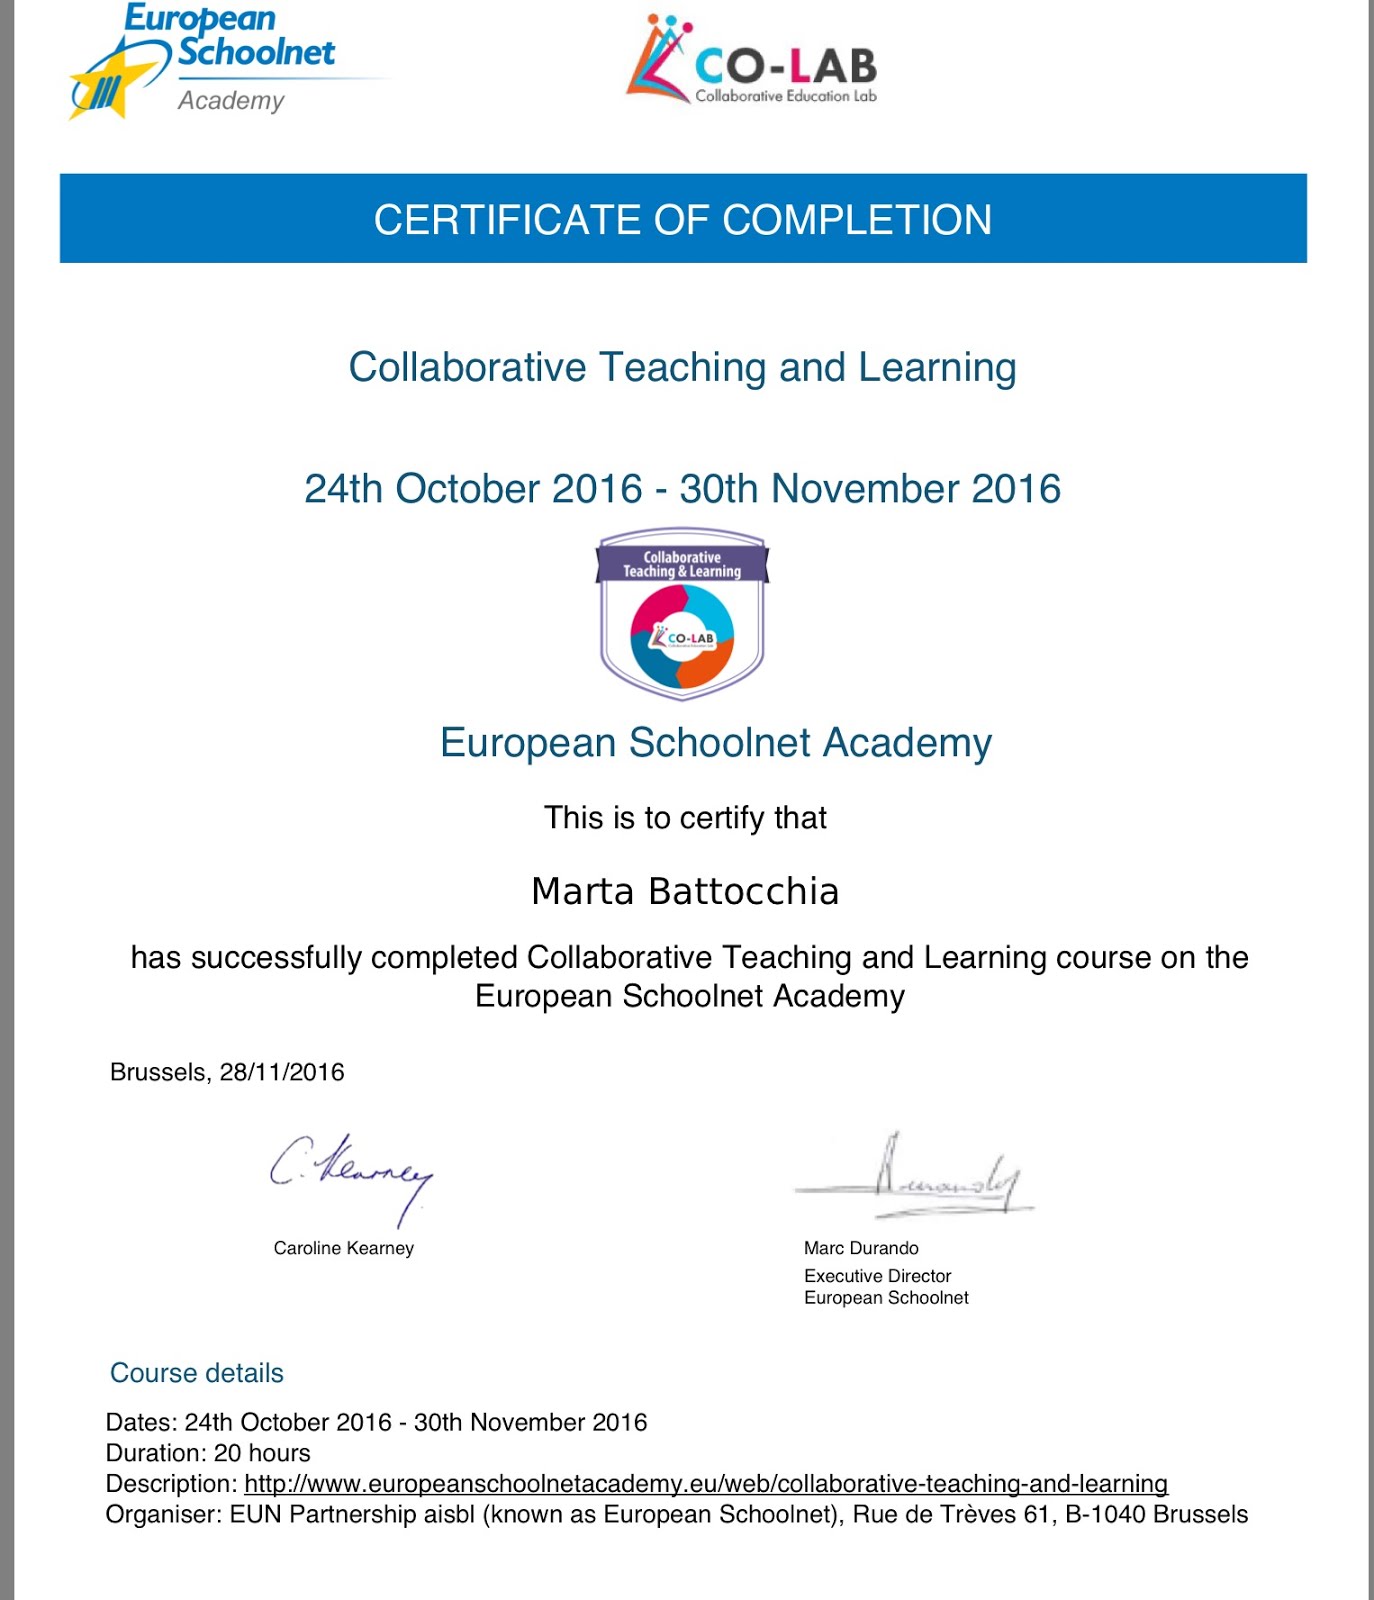 Collaborative teaching and learning course